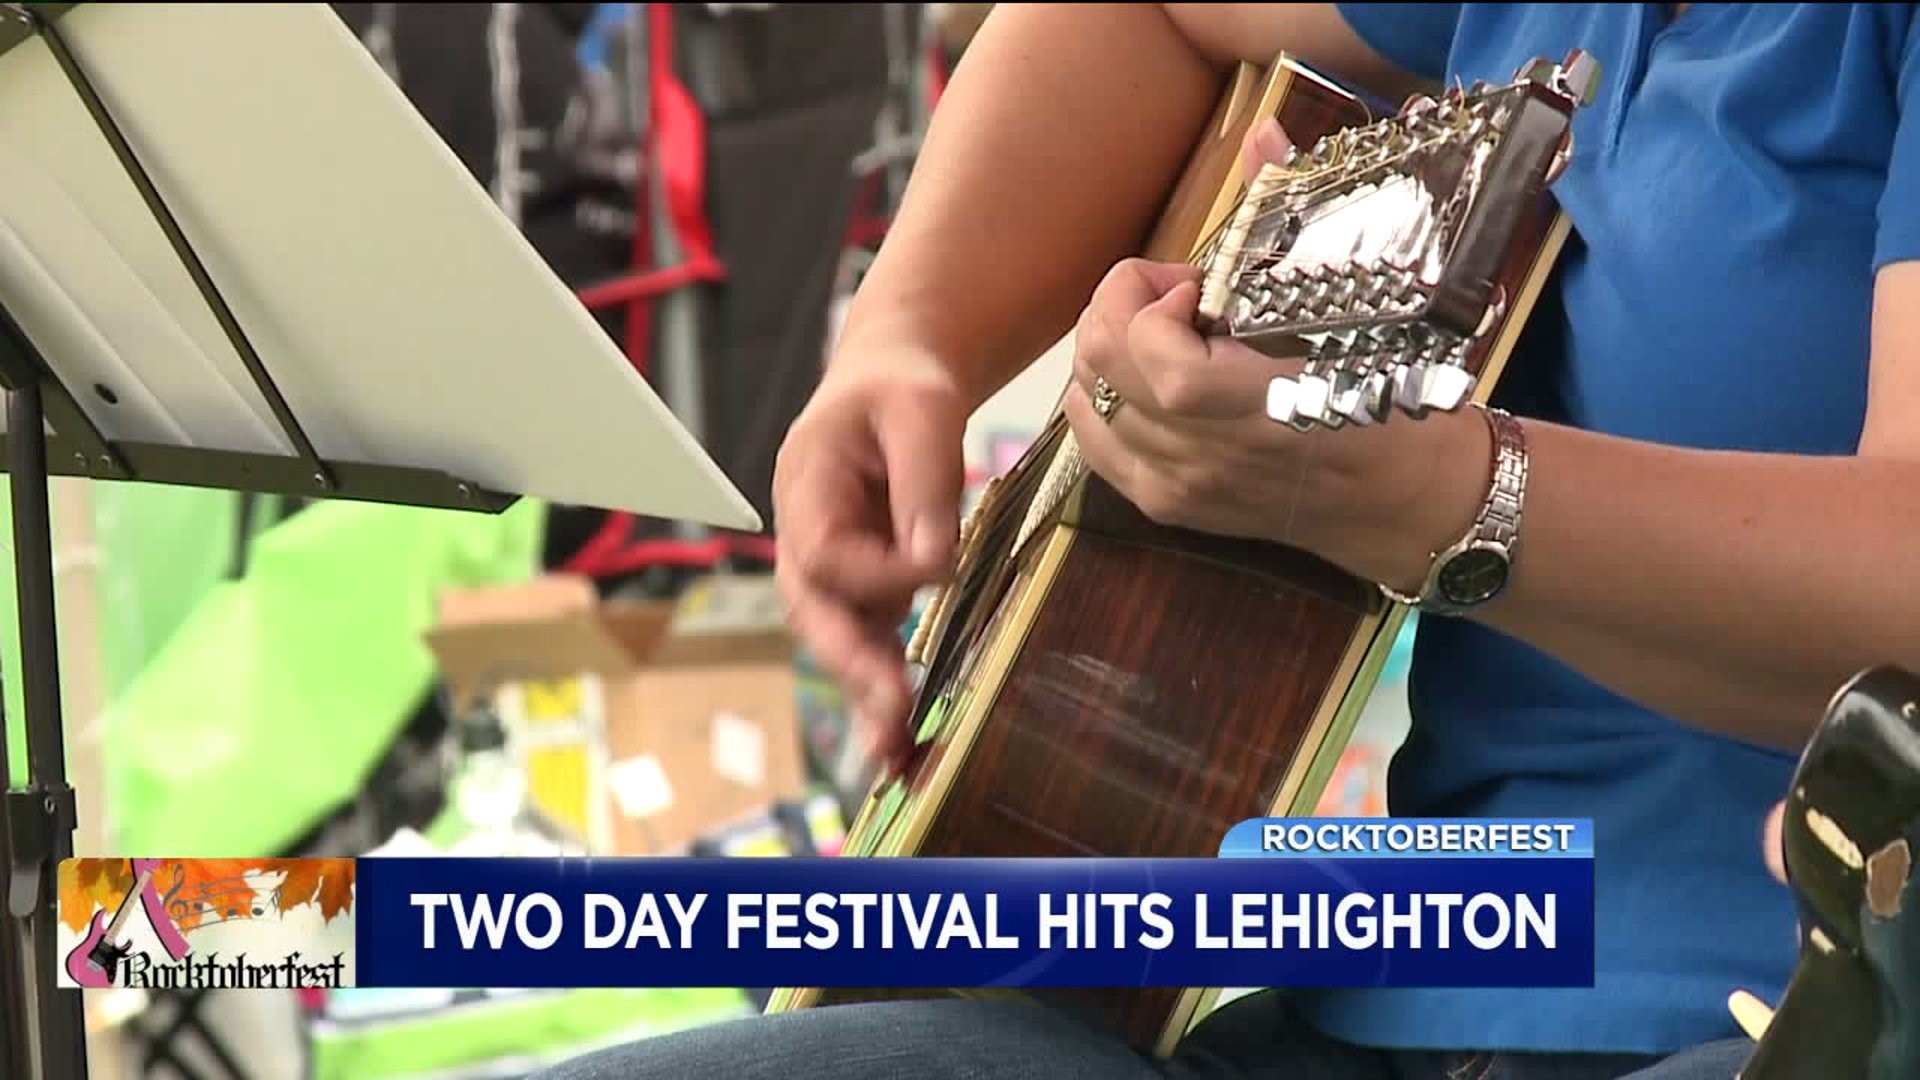 RockToberfest: Two-Day Festival Benefiting Breast Cancer Awareness Just Days Away in Downtown Lehighton